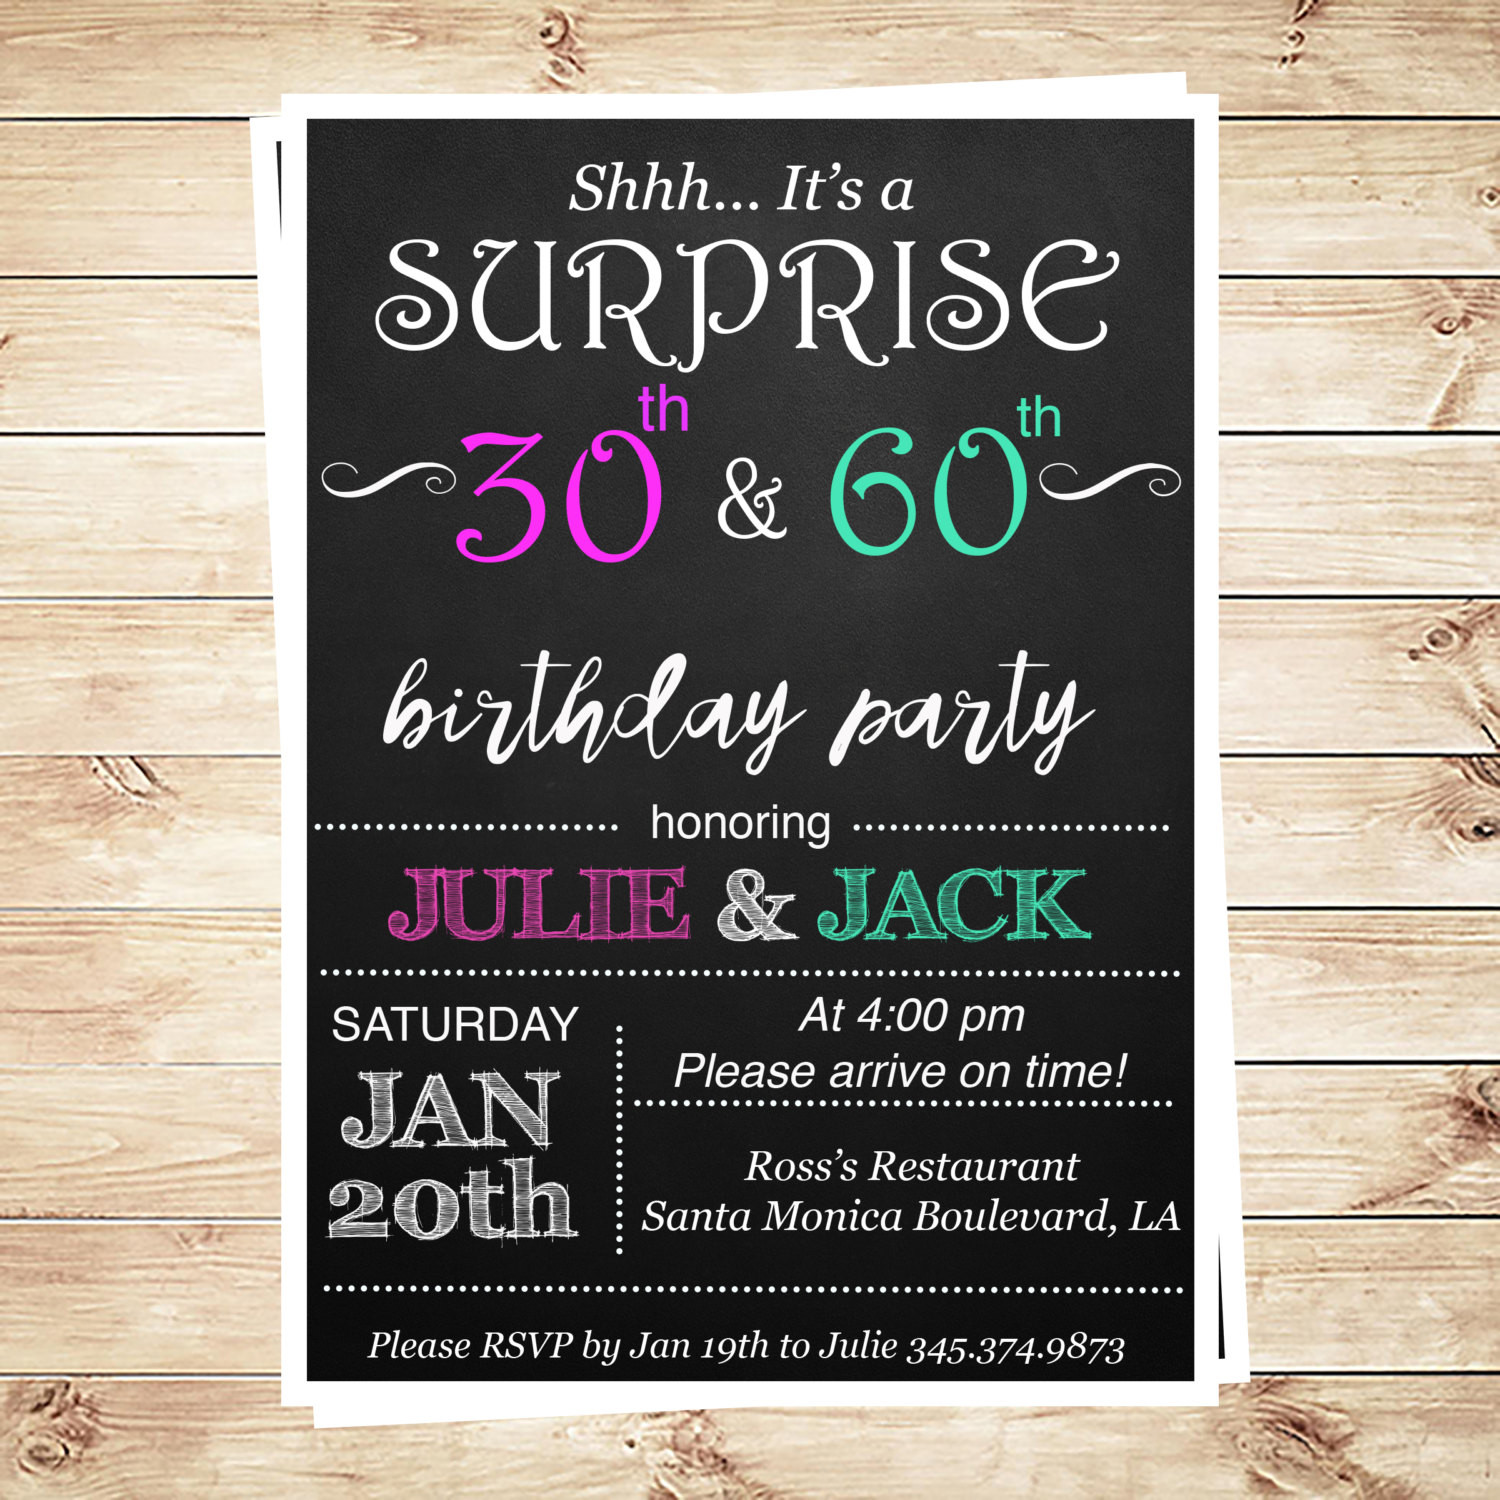 Joint Birthday Party Invitations
 Joint birthday party invitations for adults by